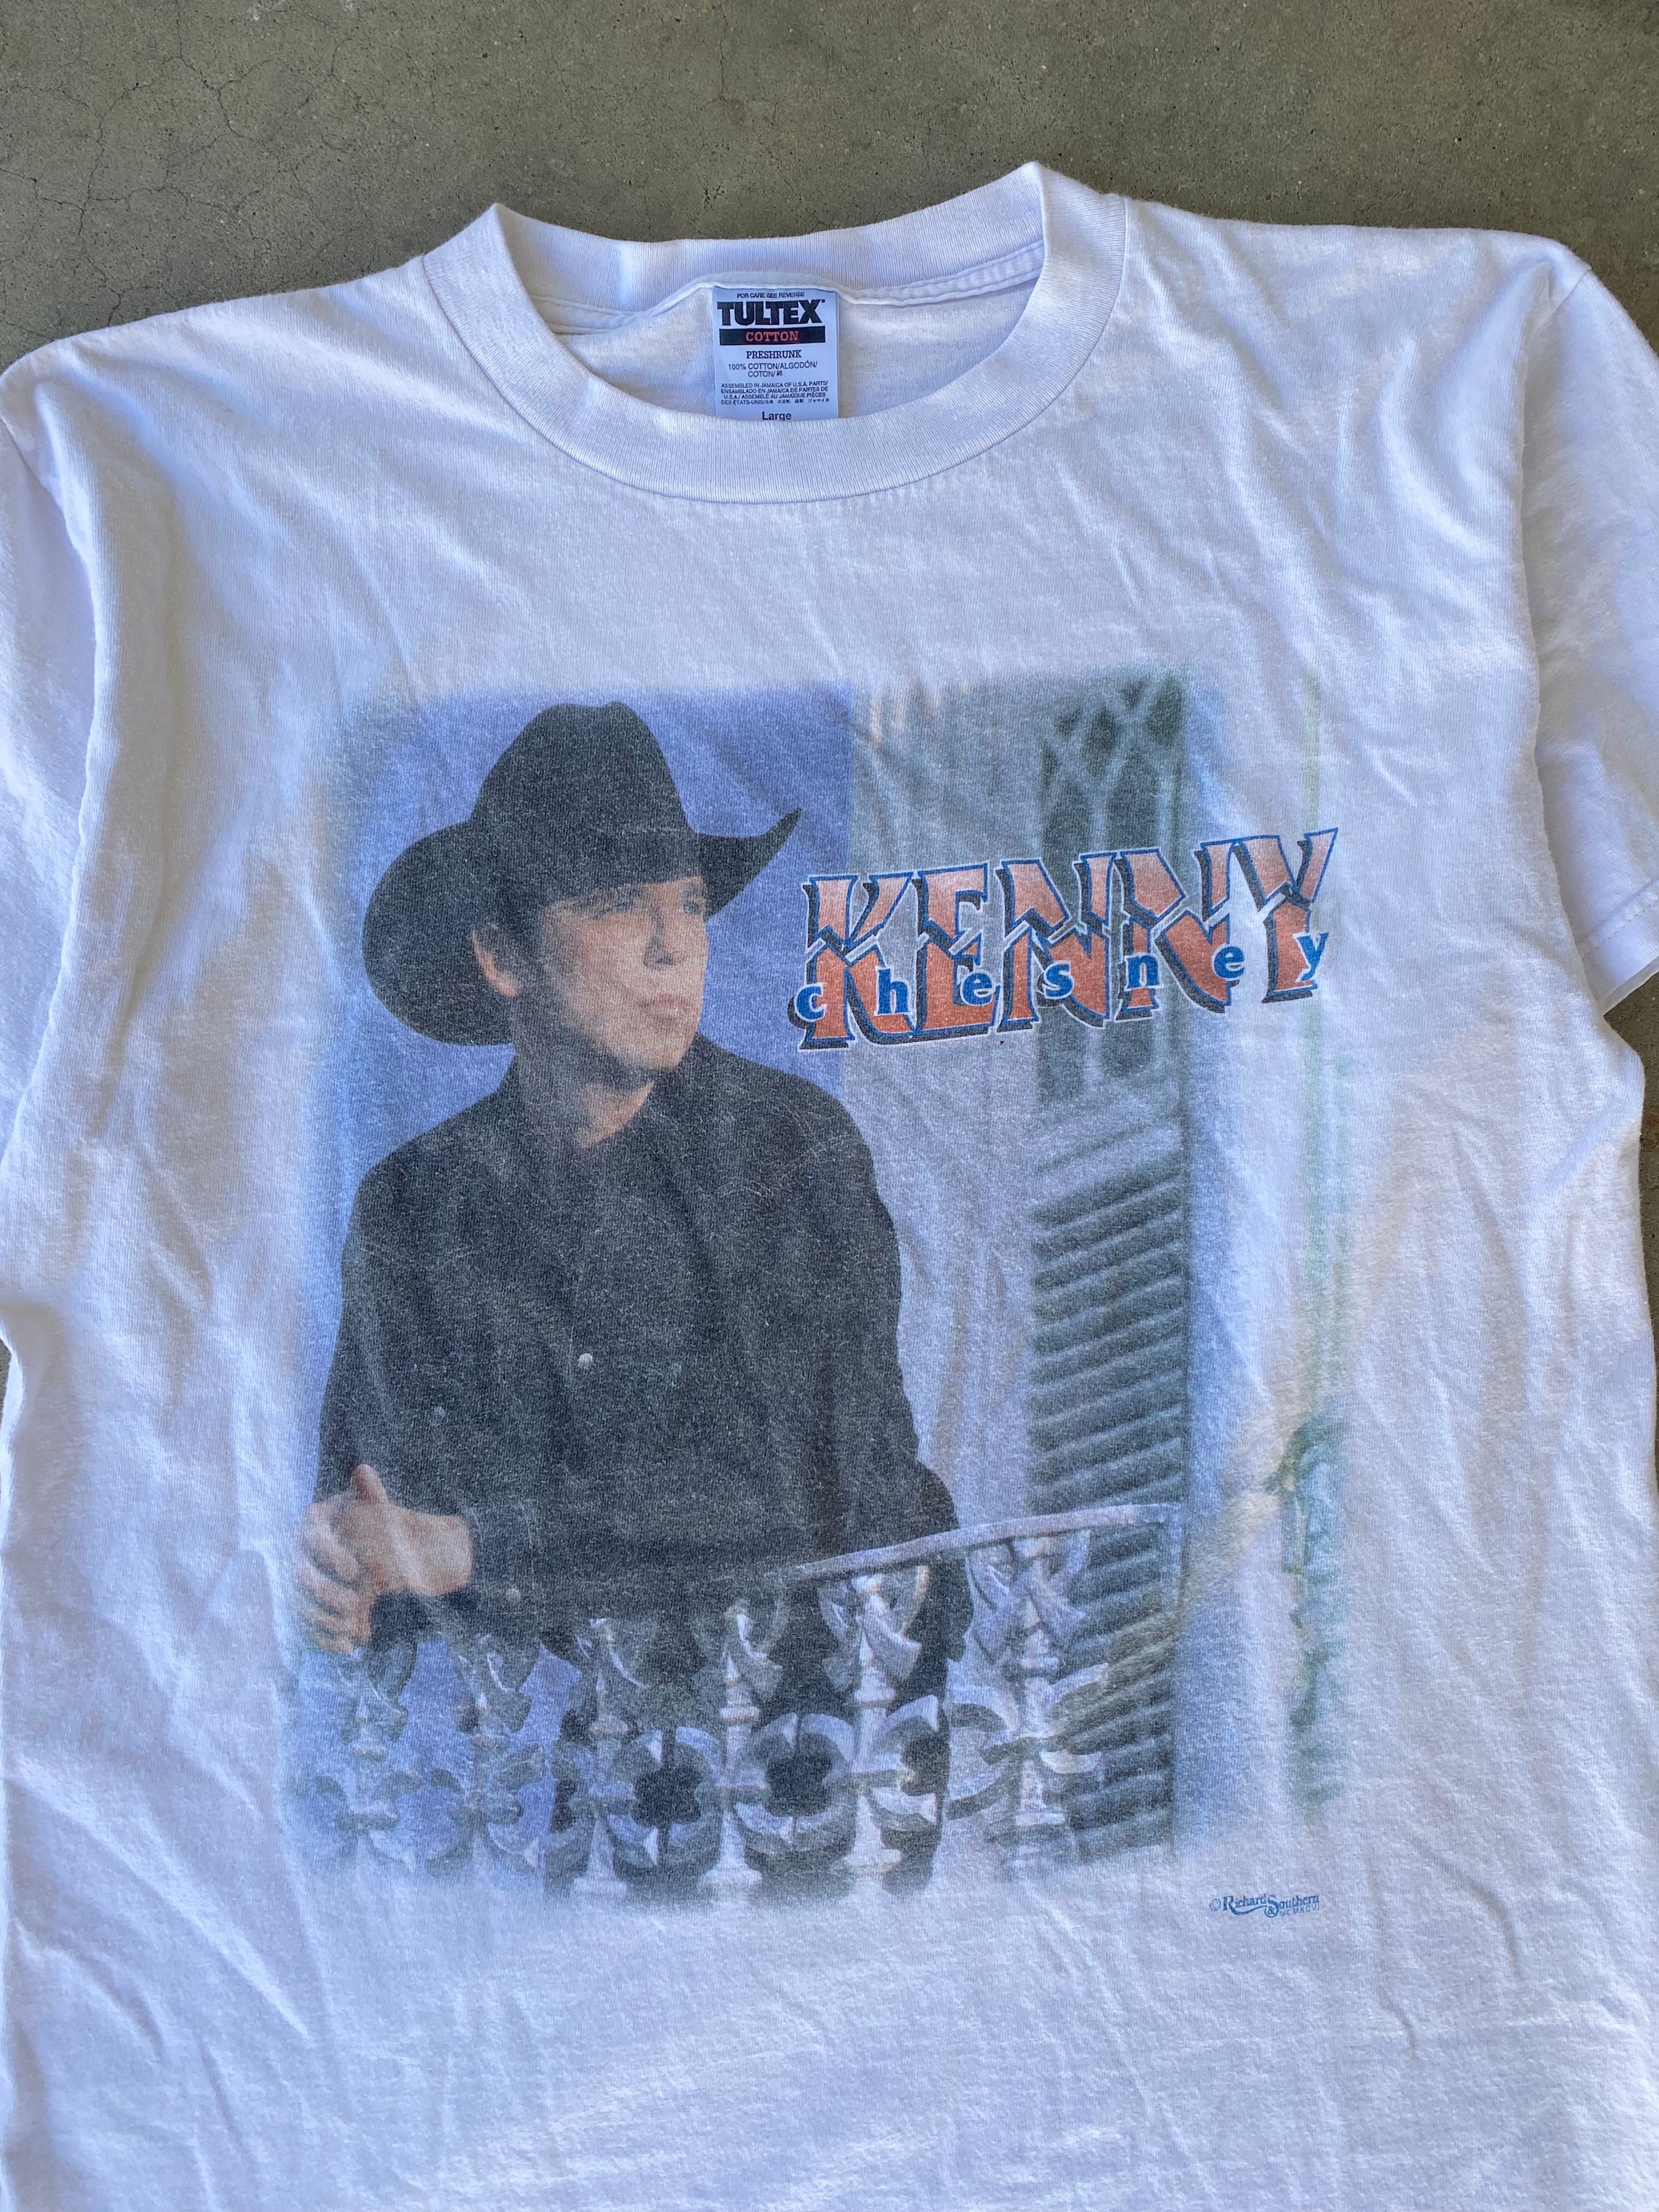 1997 Kenny Chesney "I Will Stand" Tour T-Shirt